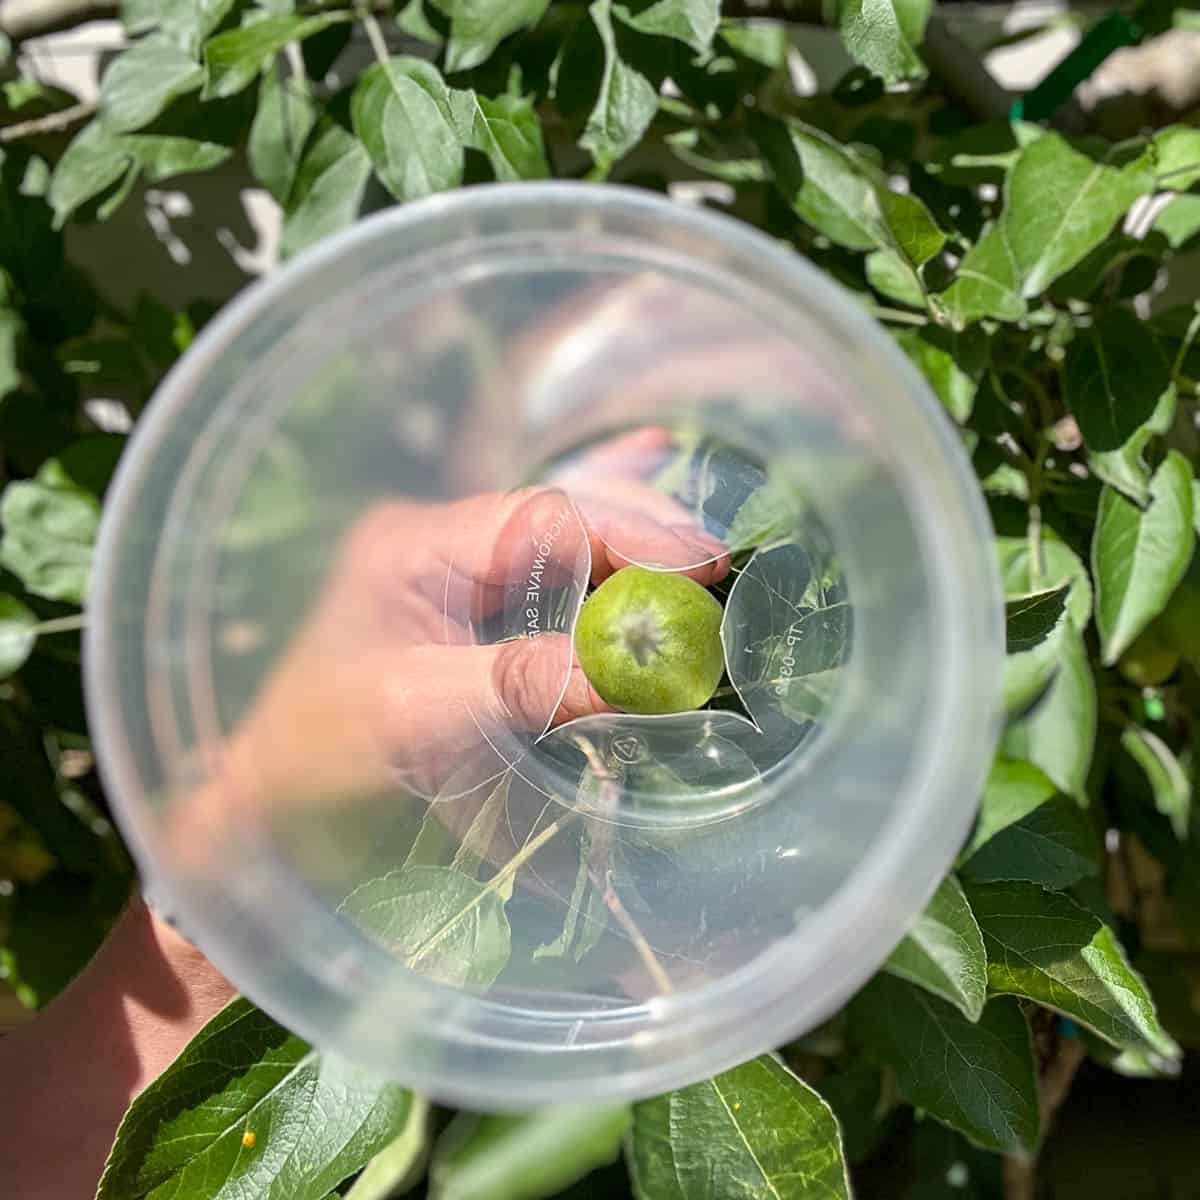 Inside a deli container with apple popping through.